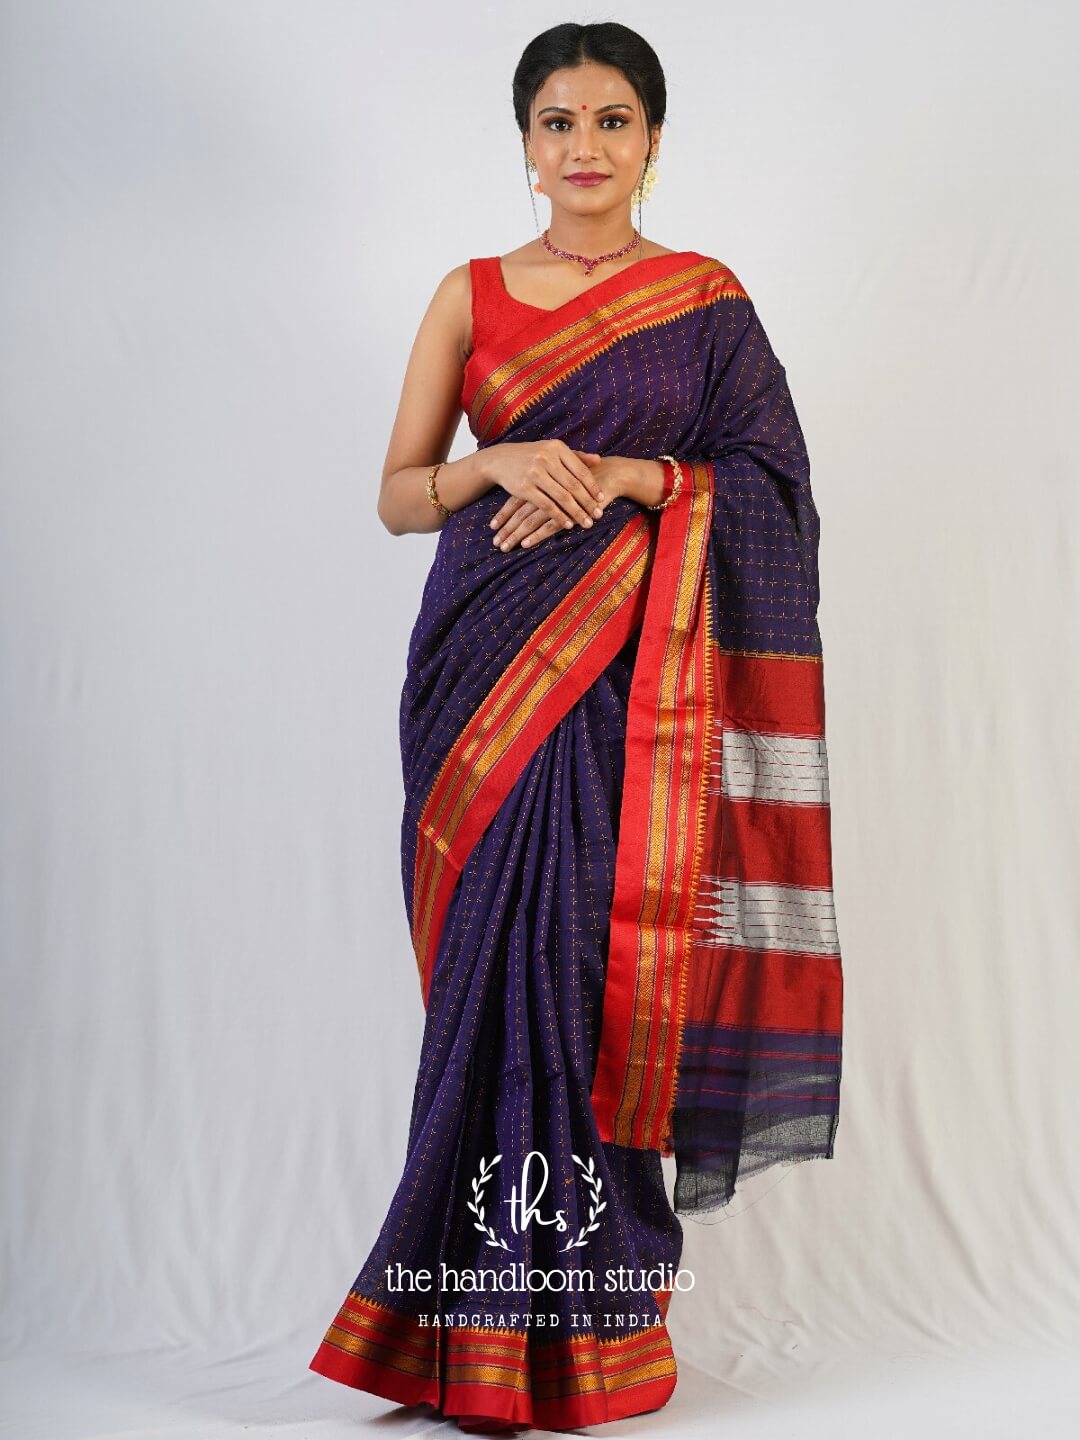 Buy Very Much Indian Traditional Patteda Anchu Ilkal Handloom Saree~ Blue  at Amazon.in